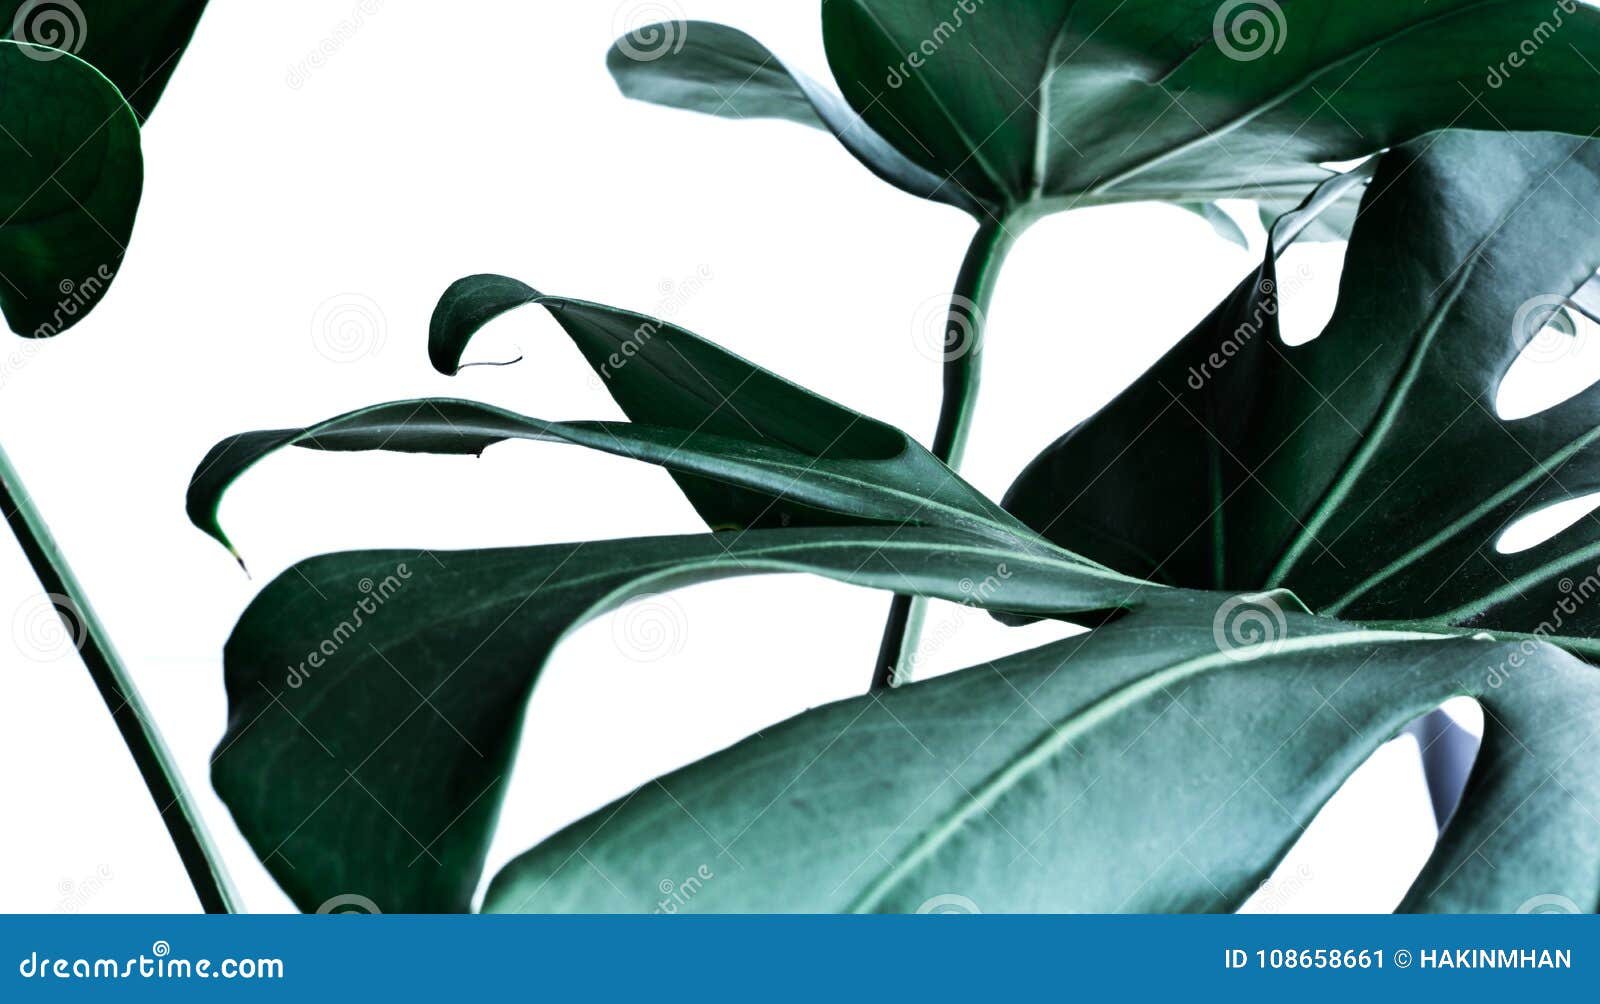 real monstera leaves decorating for composition .tropical